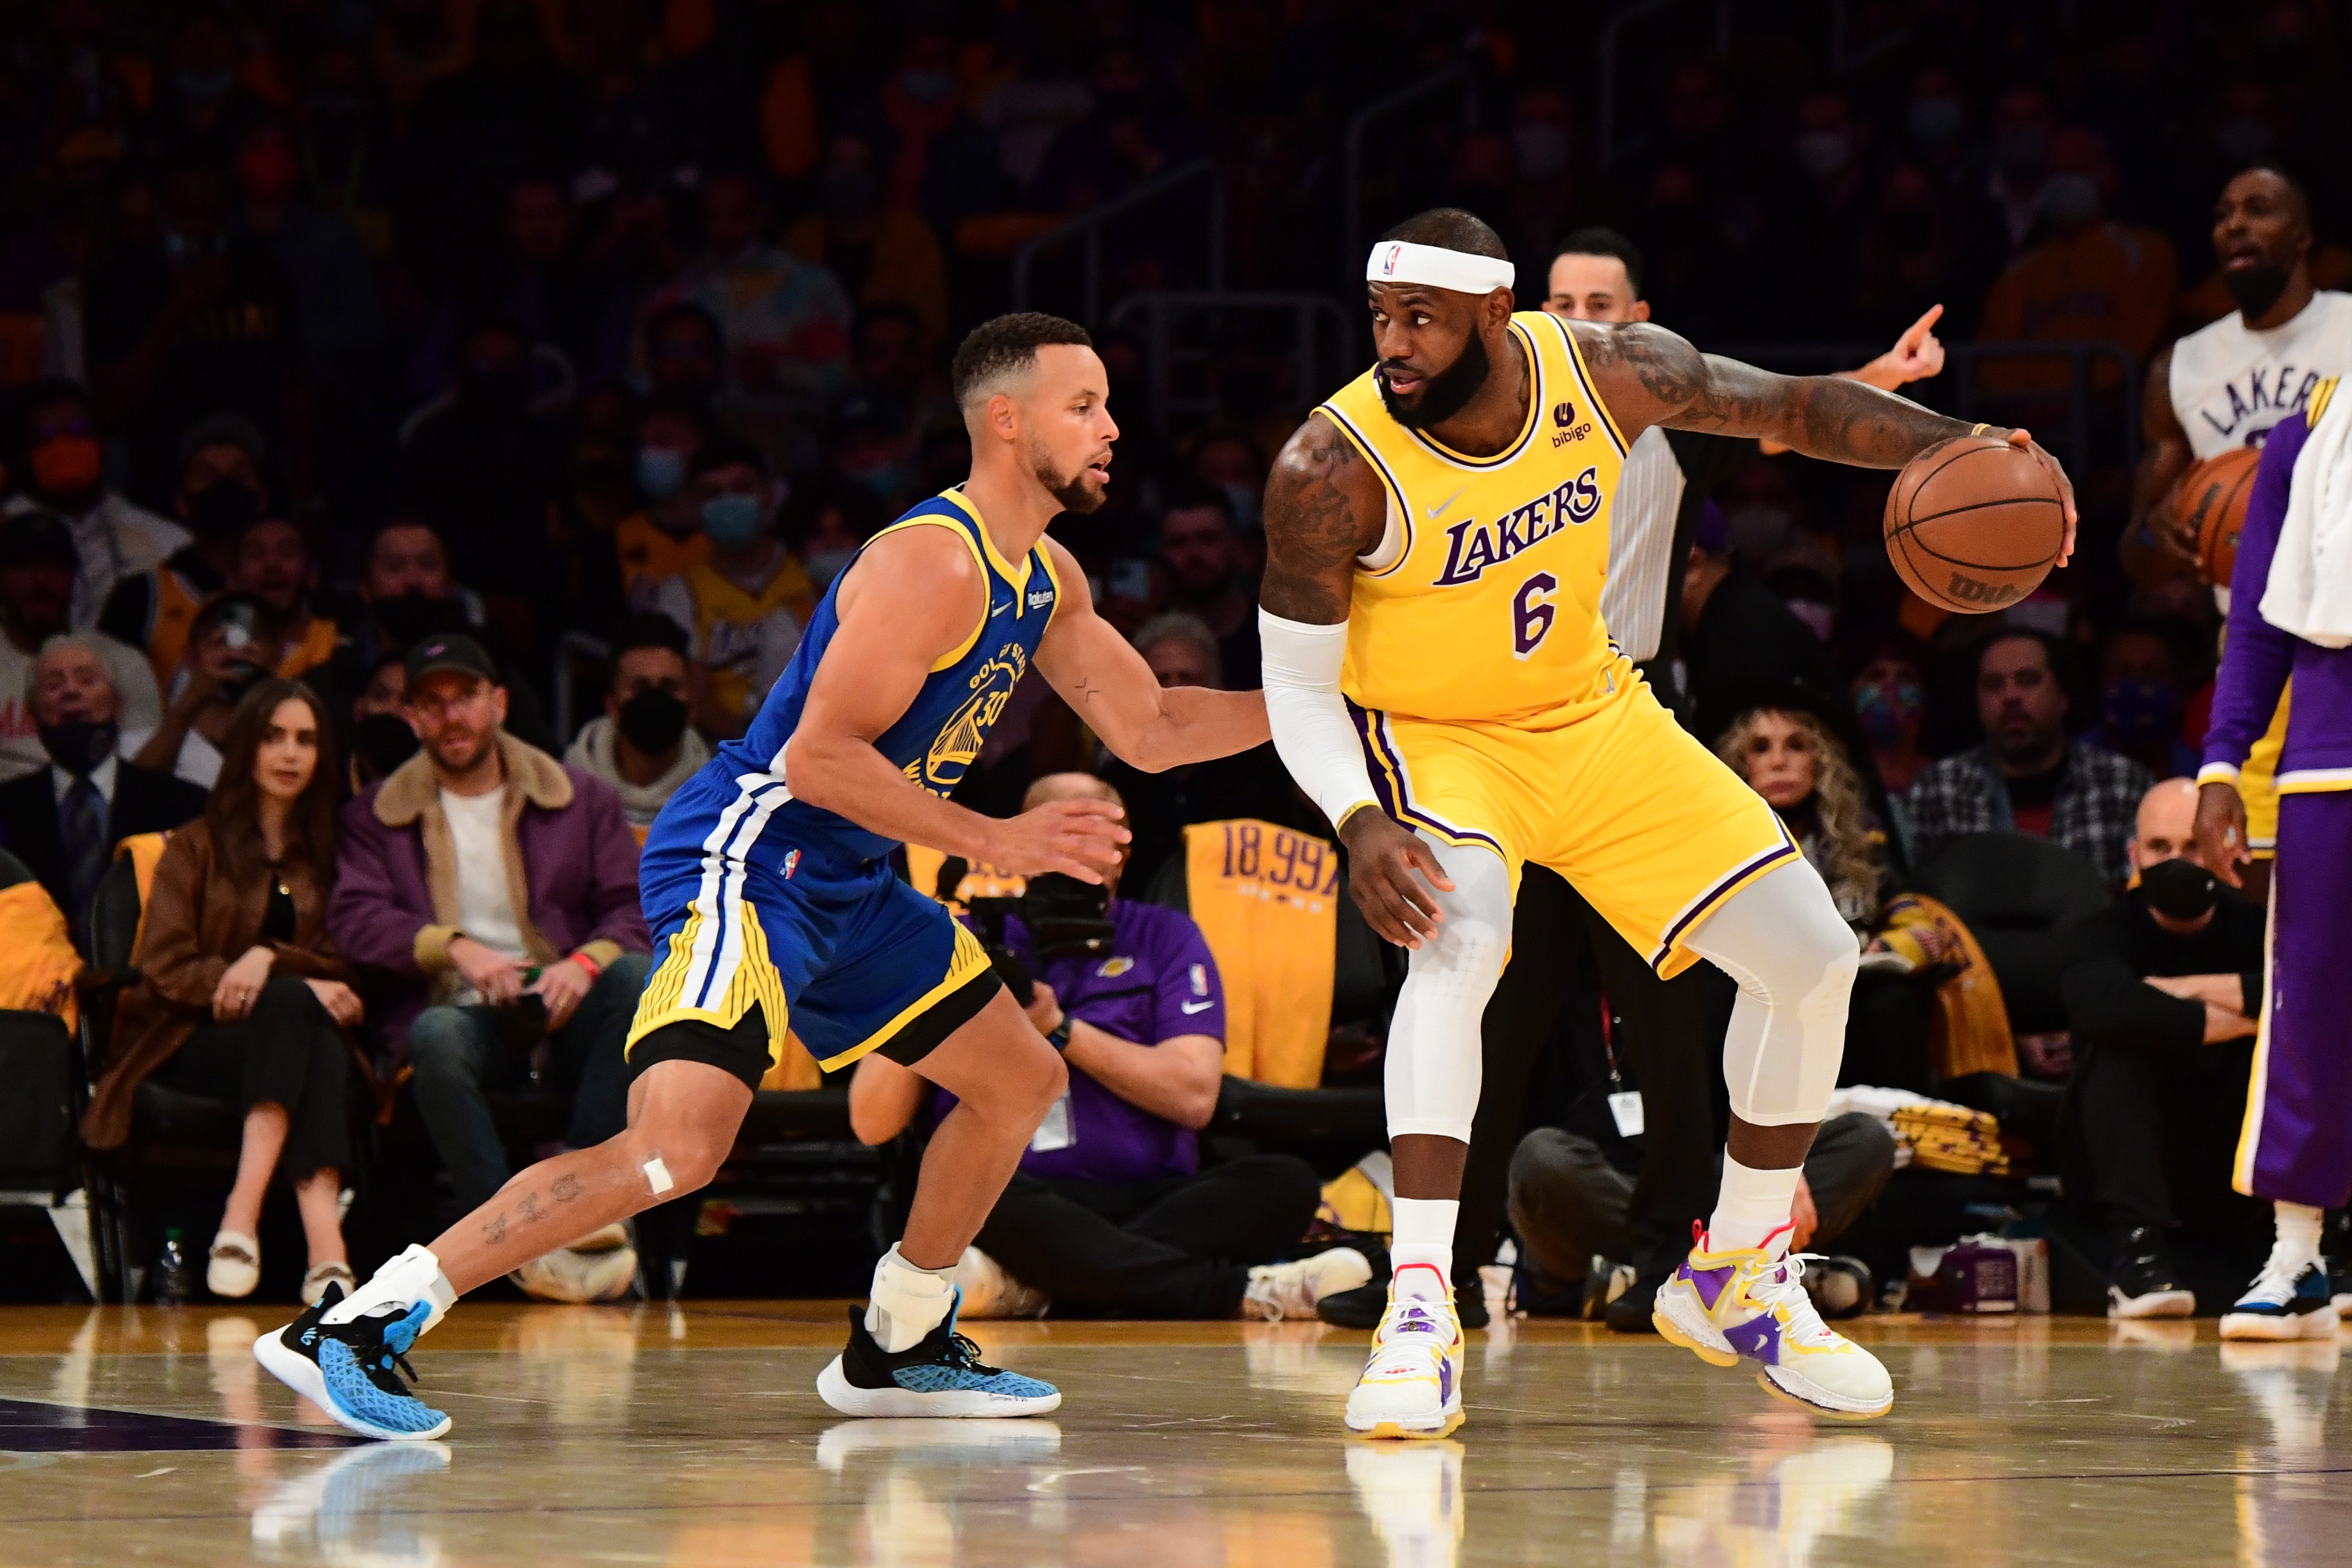 Lakers' LeBron James Congratulates Steph Curry on NBA 3Point Record